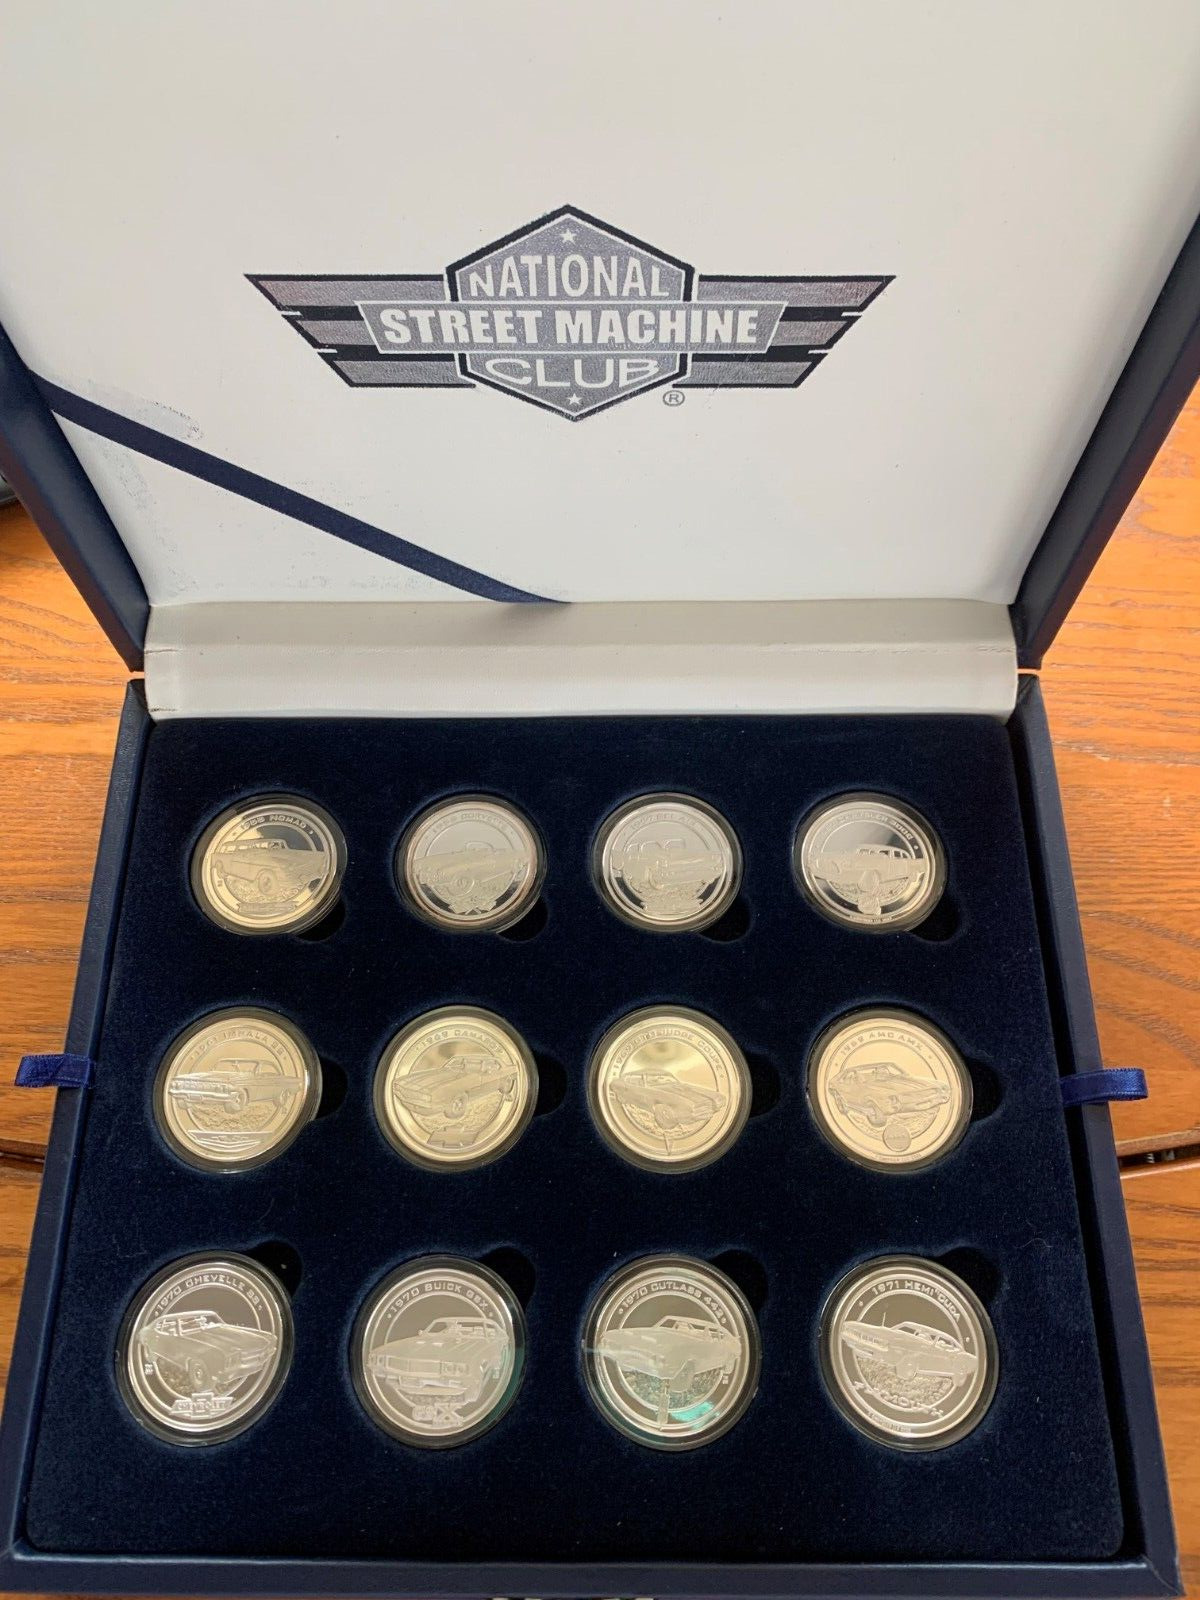 STREET THUNDER SILVER -PLATED PROOF COIN SERIES  12 COINS